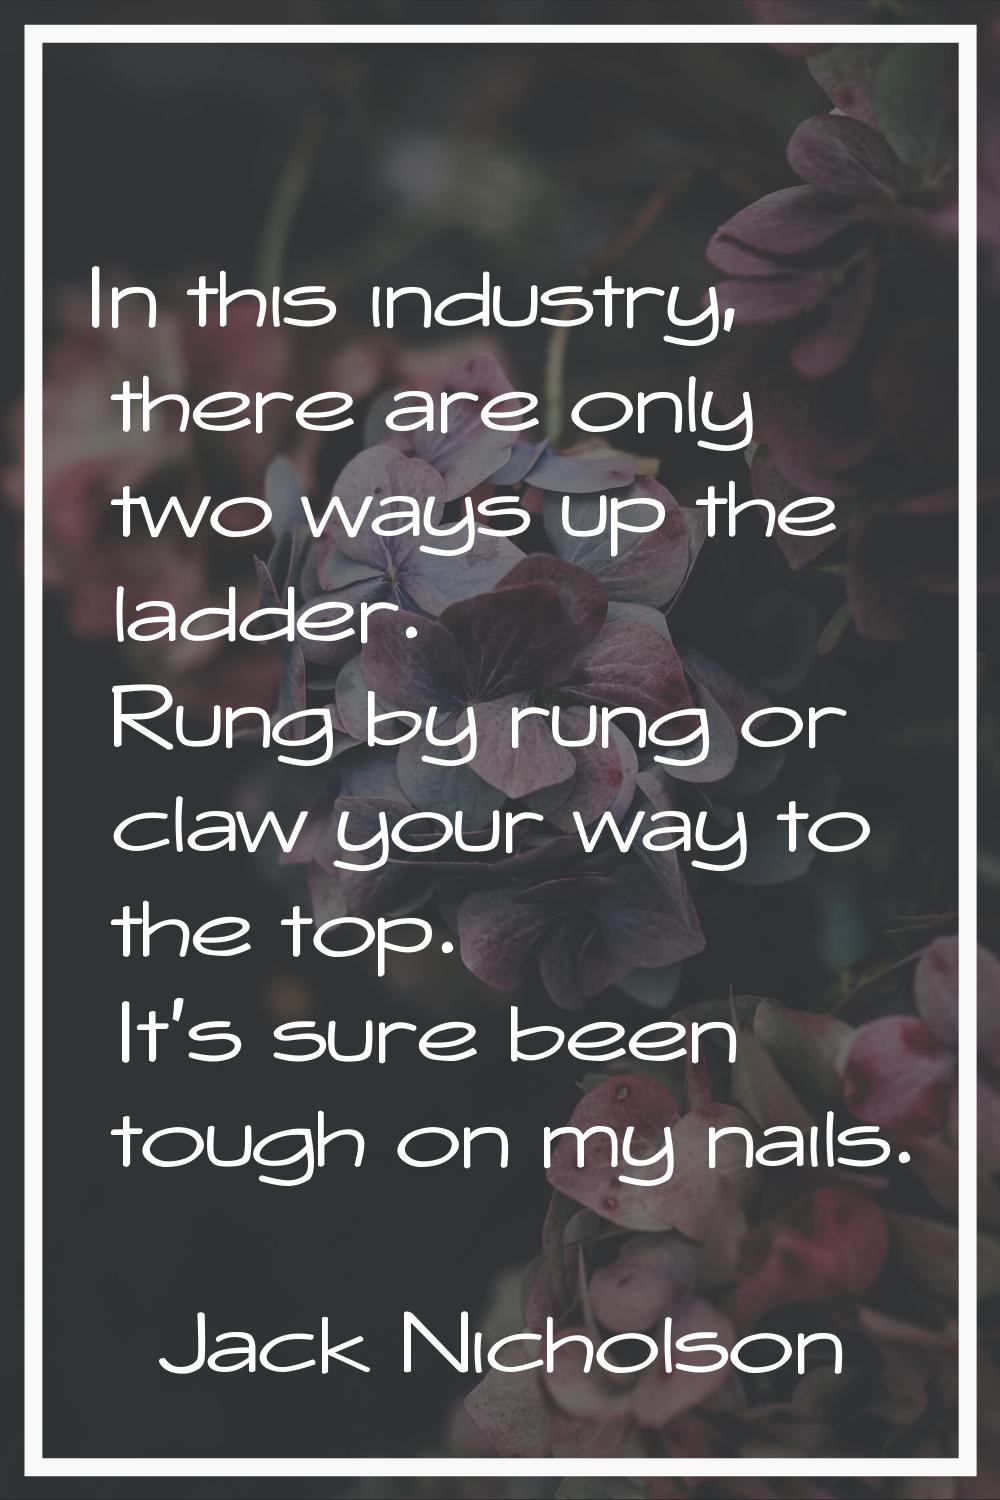 In this industry, there are only two ways up the ladder. Rung by rung or claw your way to the top. 